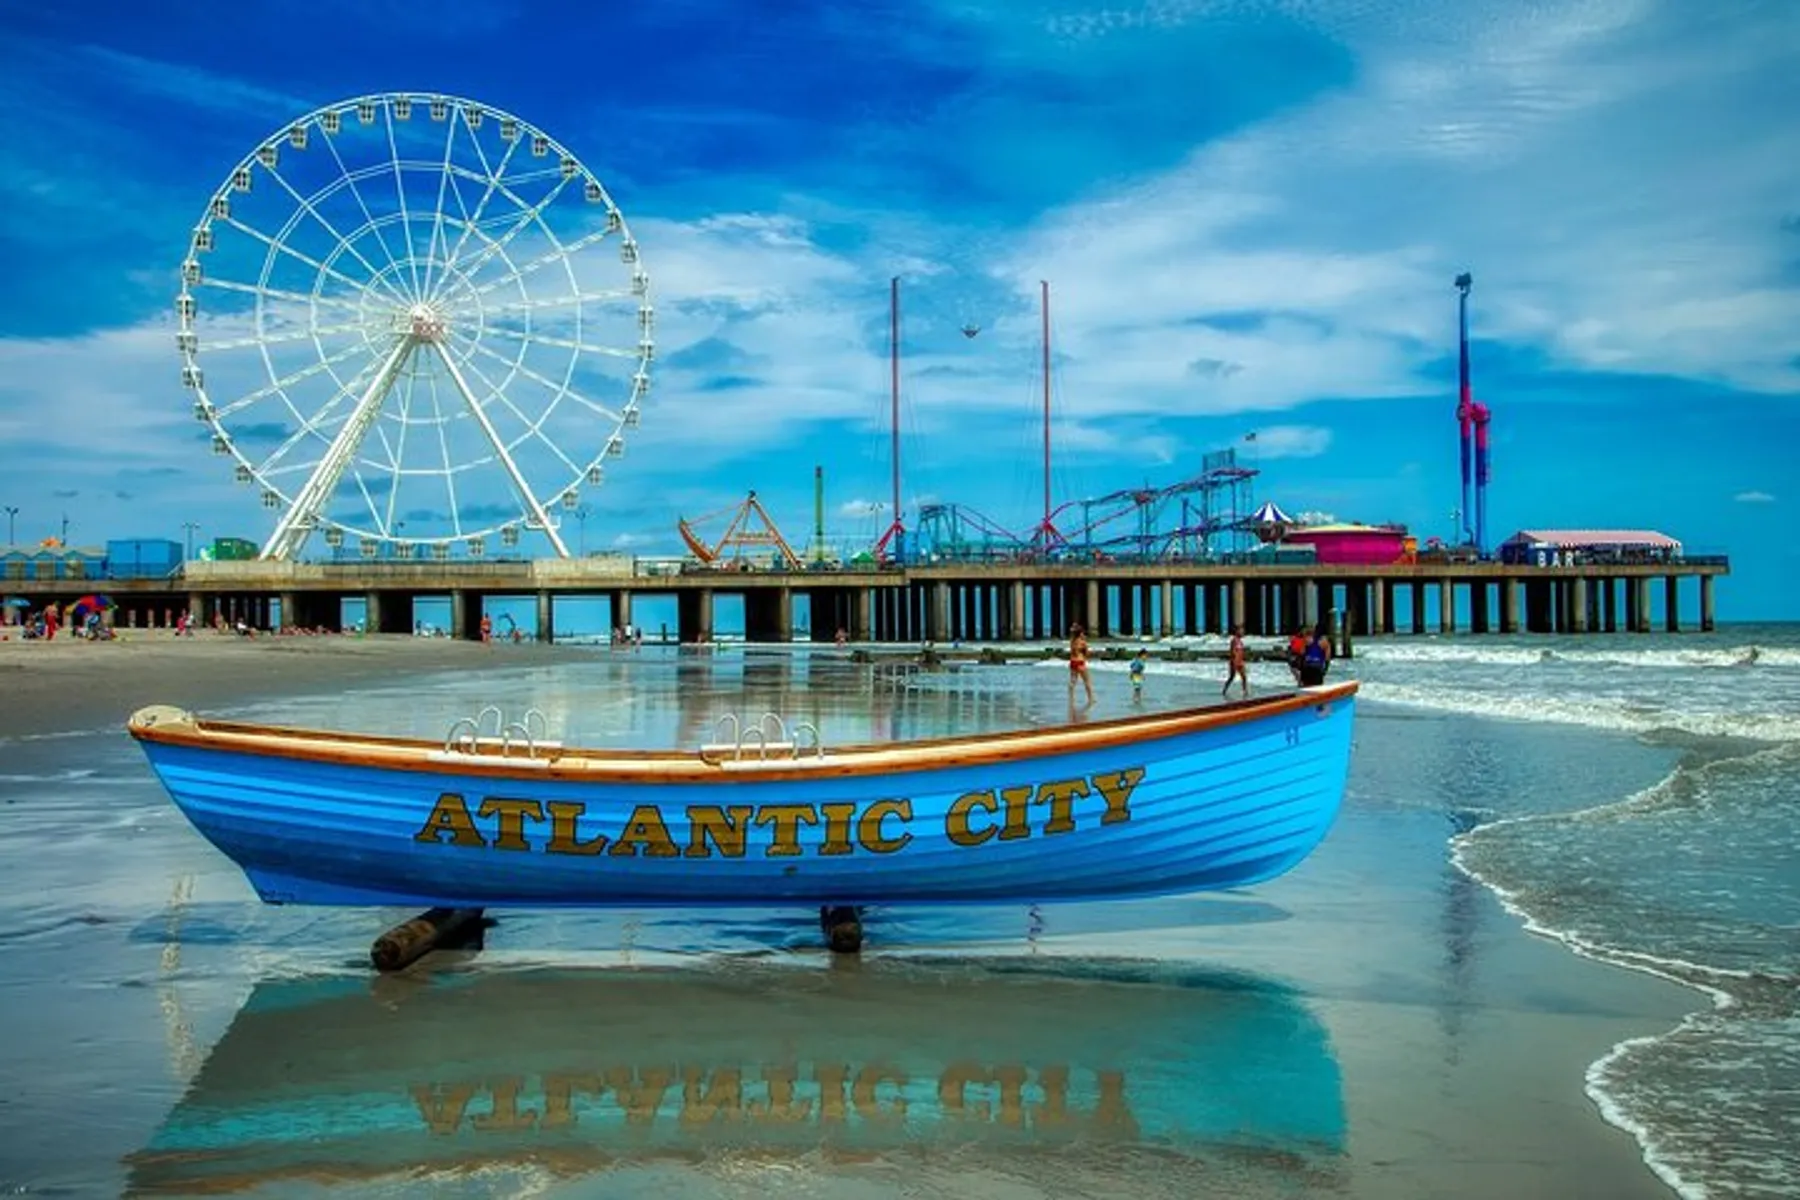 A lifeboat with the words Atlantic City painted on its hull is positioned on a sandy beach against the backdrop of a pier with amusement park rides, including a Ferris wheel, under a partly cloudy sky.